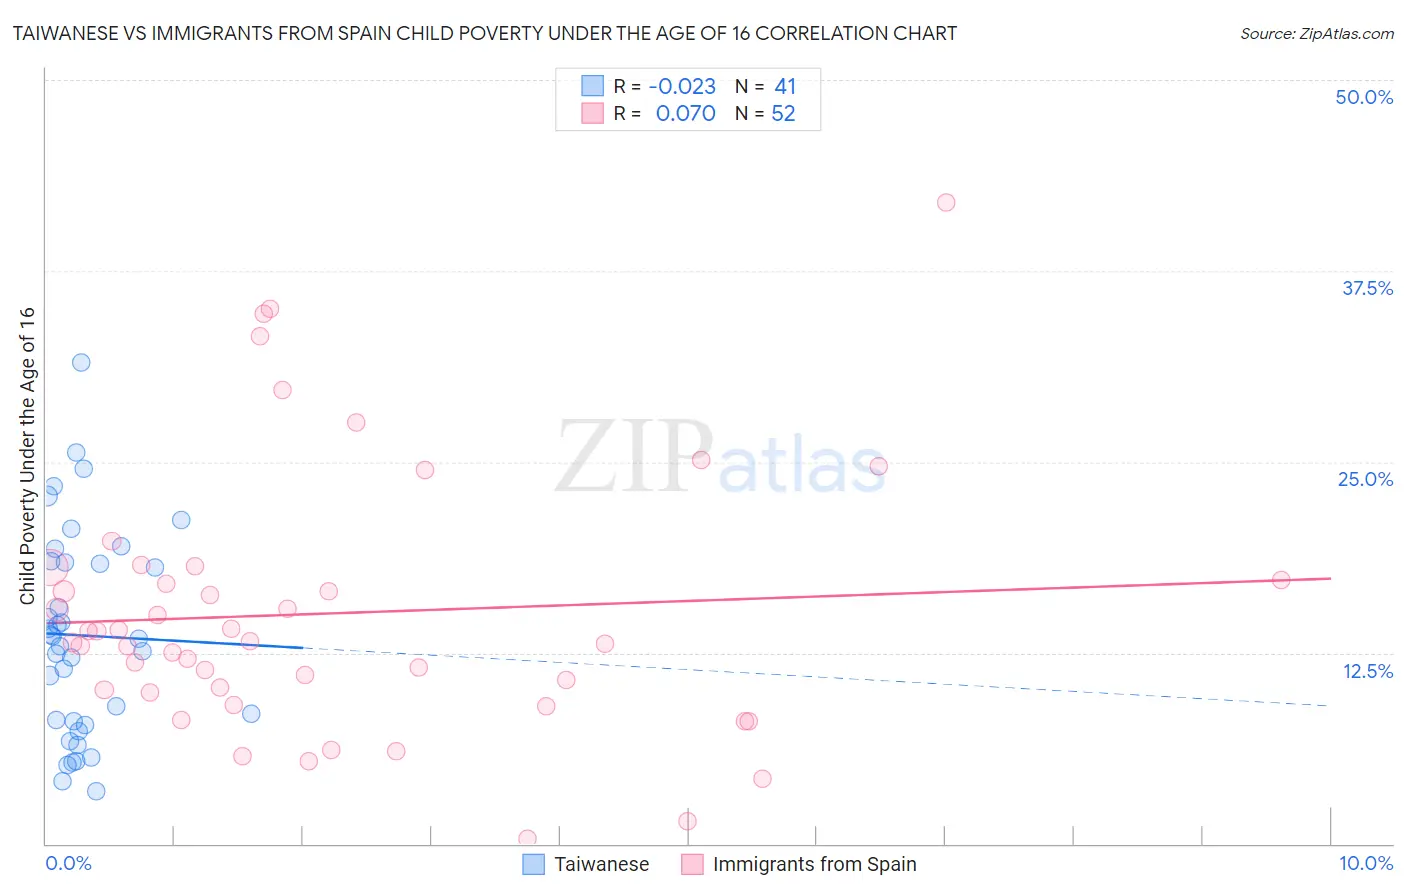 Taiwanese vs Immigrants from Spain Child Poverty Under the Age of 16